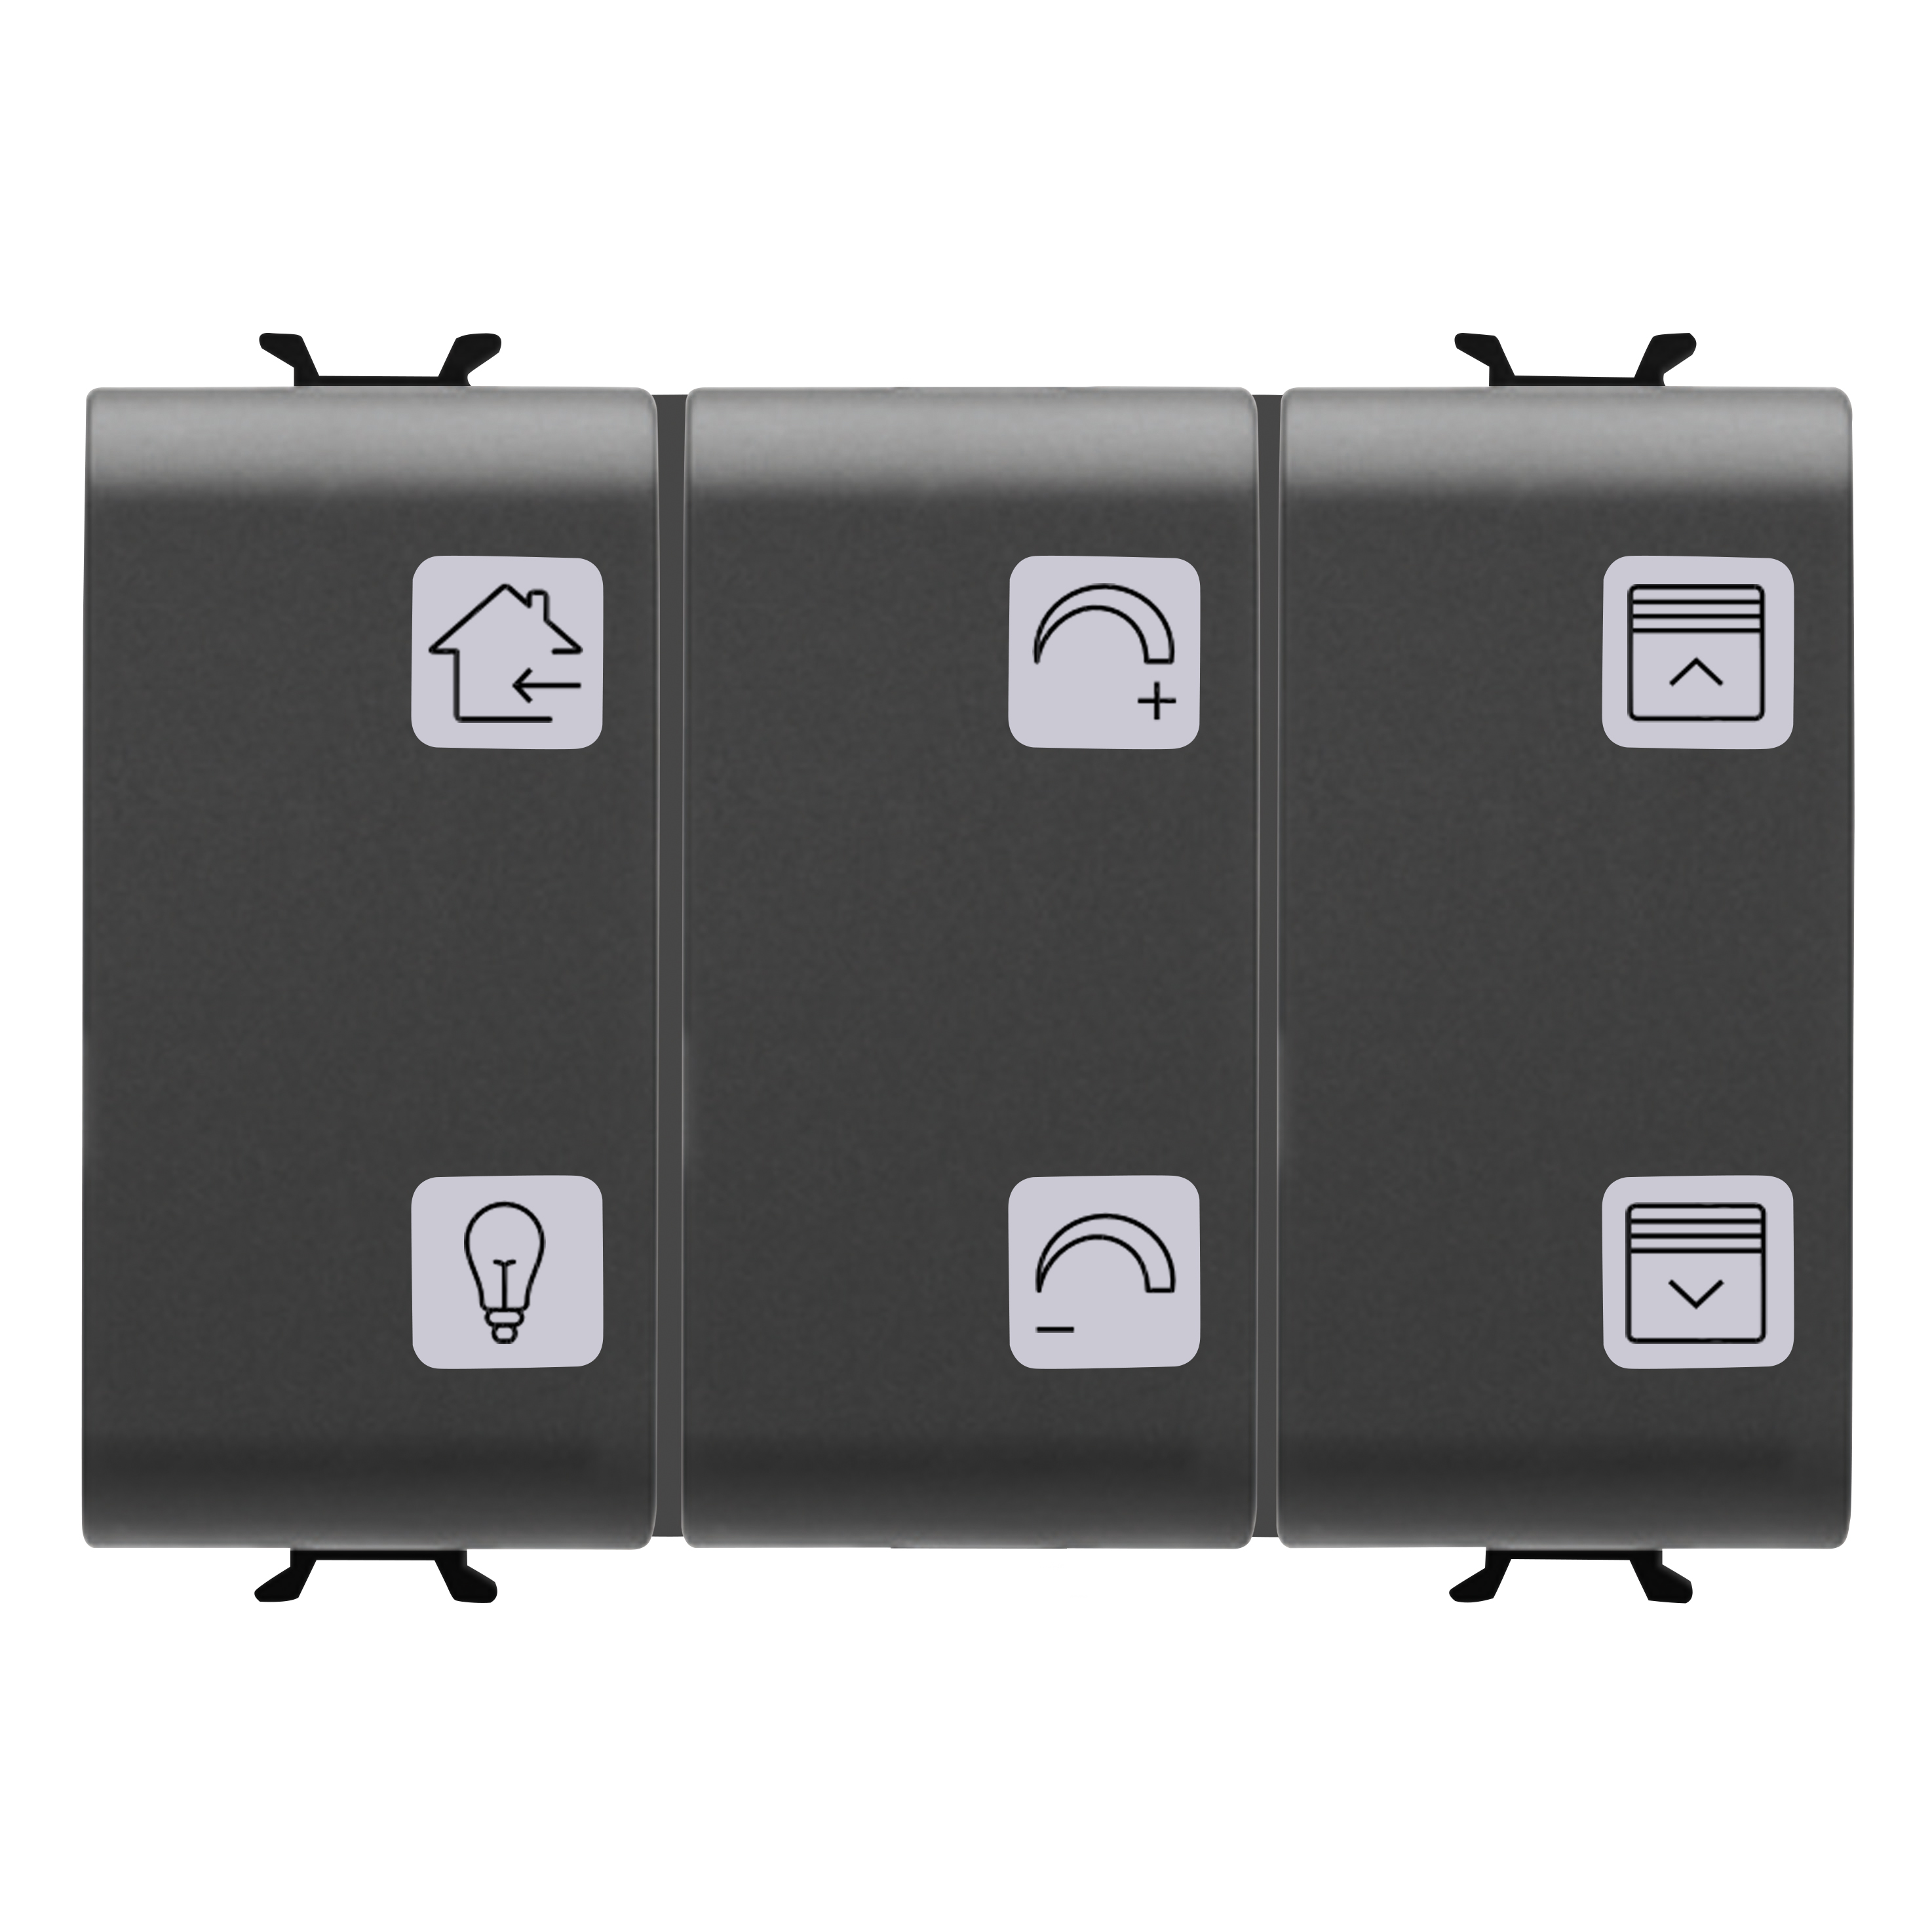 PUSH-BUTTON PANEL WITH INTERCHANGEABLE SYMBOLS - KNX - 6 CHANNELS 